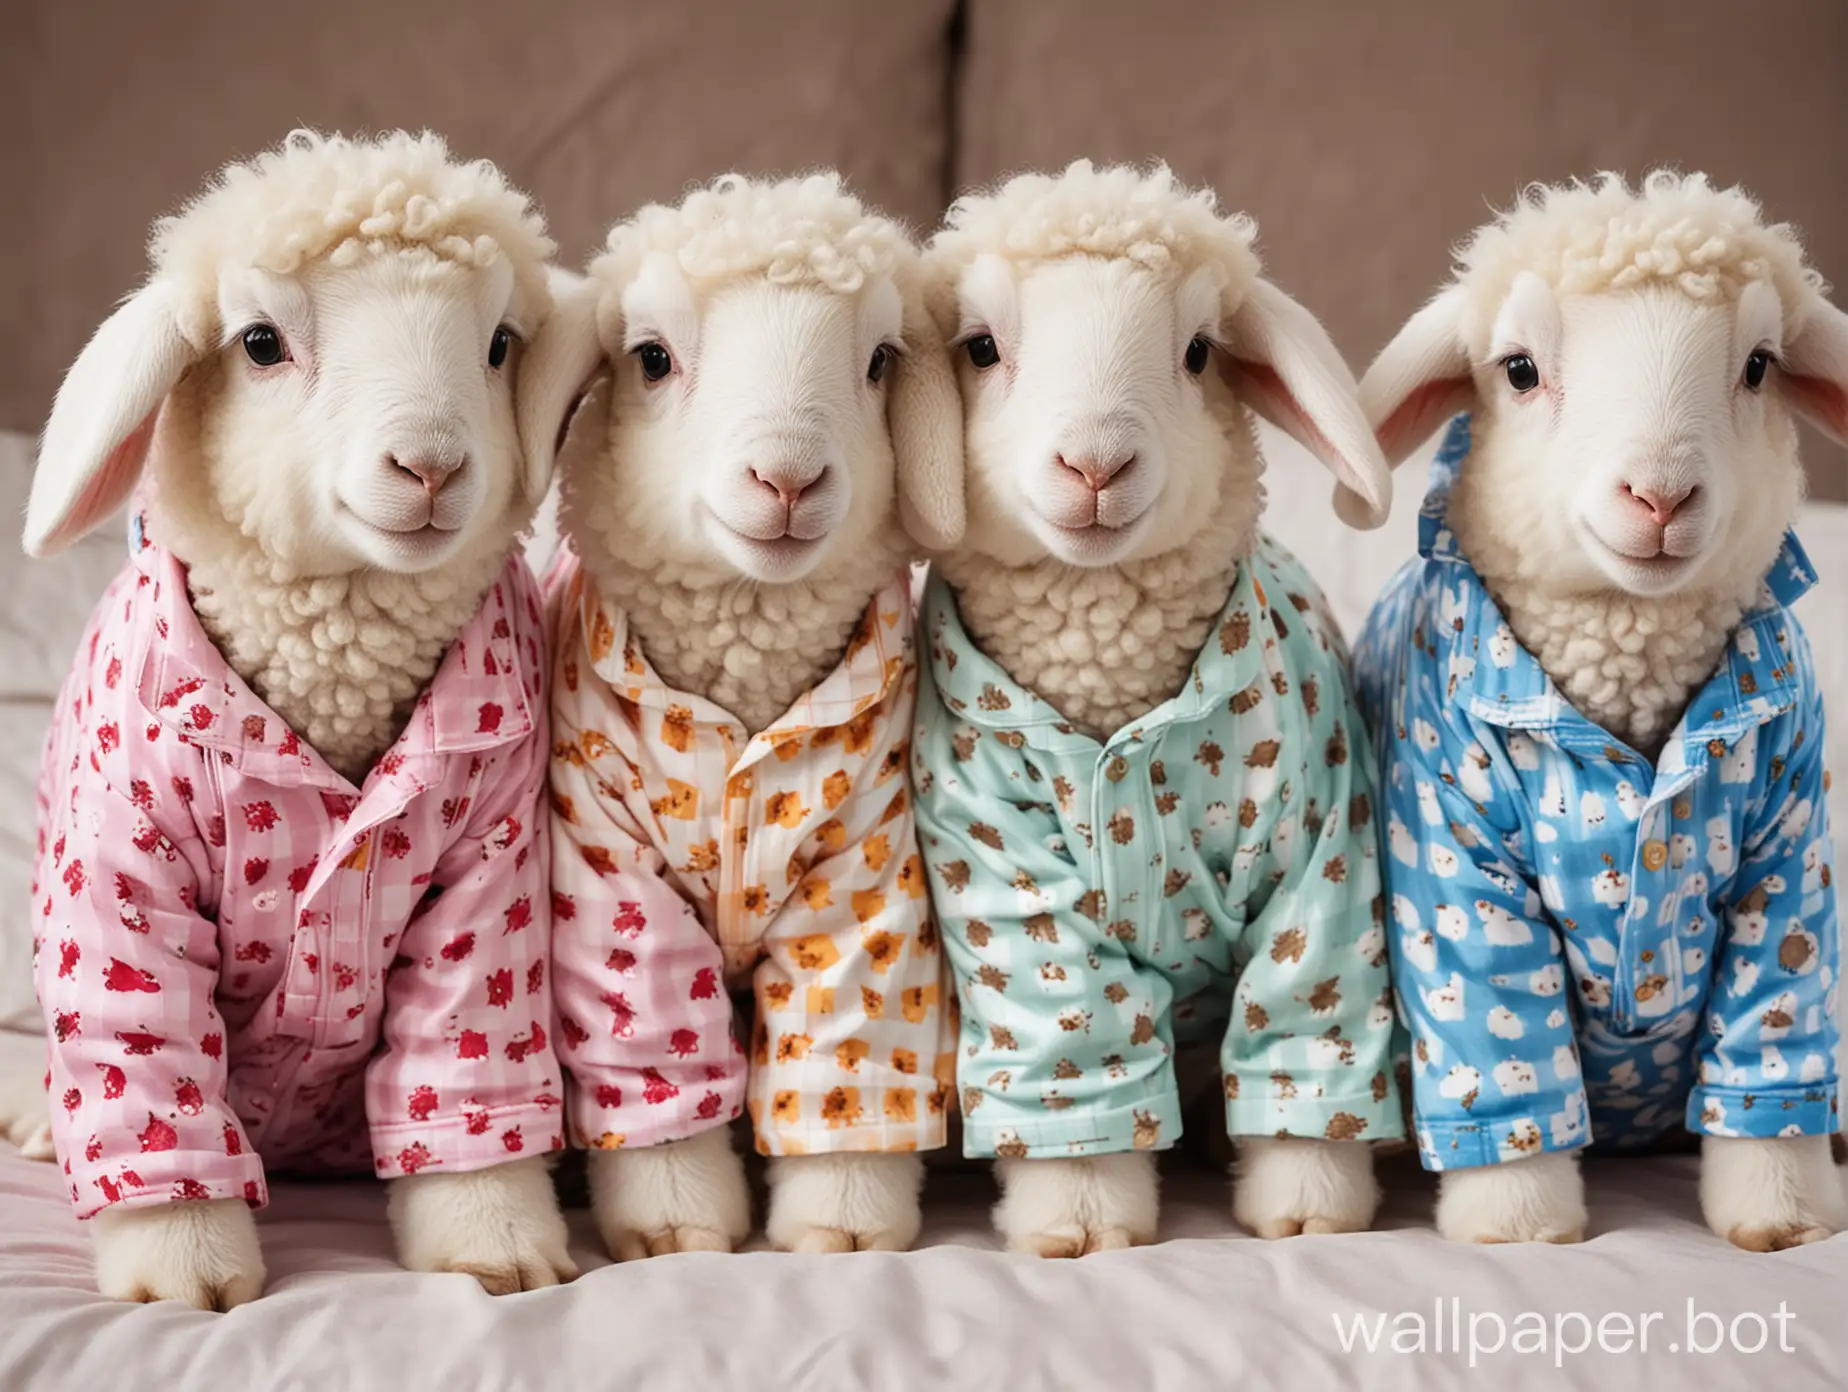 cute lambs in different color pajamas